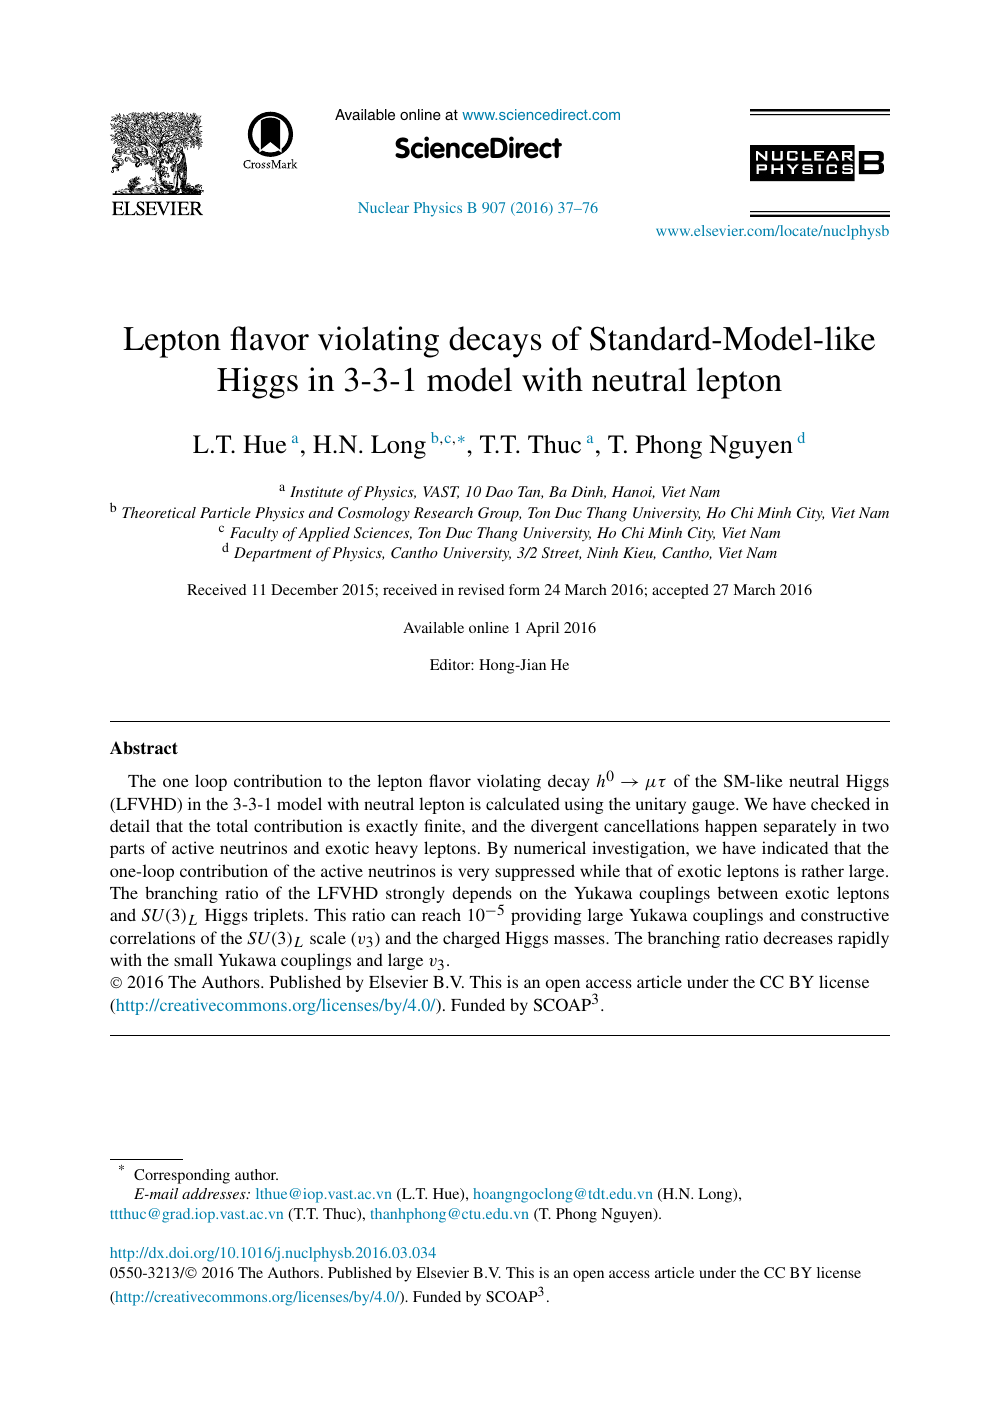 Lepton Flavor Violating Decays Of Standard Model Like Higgs In 3 3 1 Model With Neutral Lepton Topic Of Research Paper In Physical Sciences Download Scholarly Article Pdf And Read For Free On Cyberleninka Open